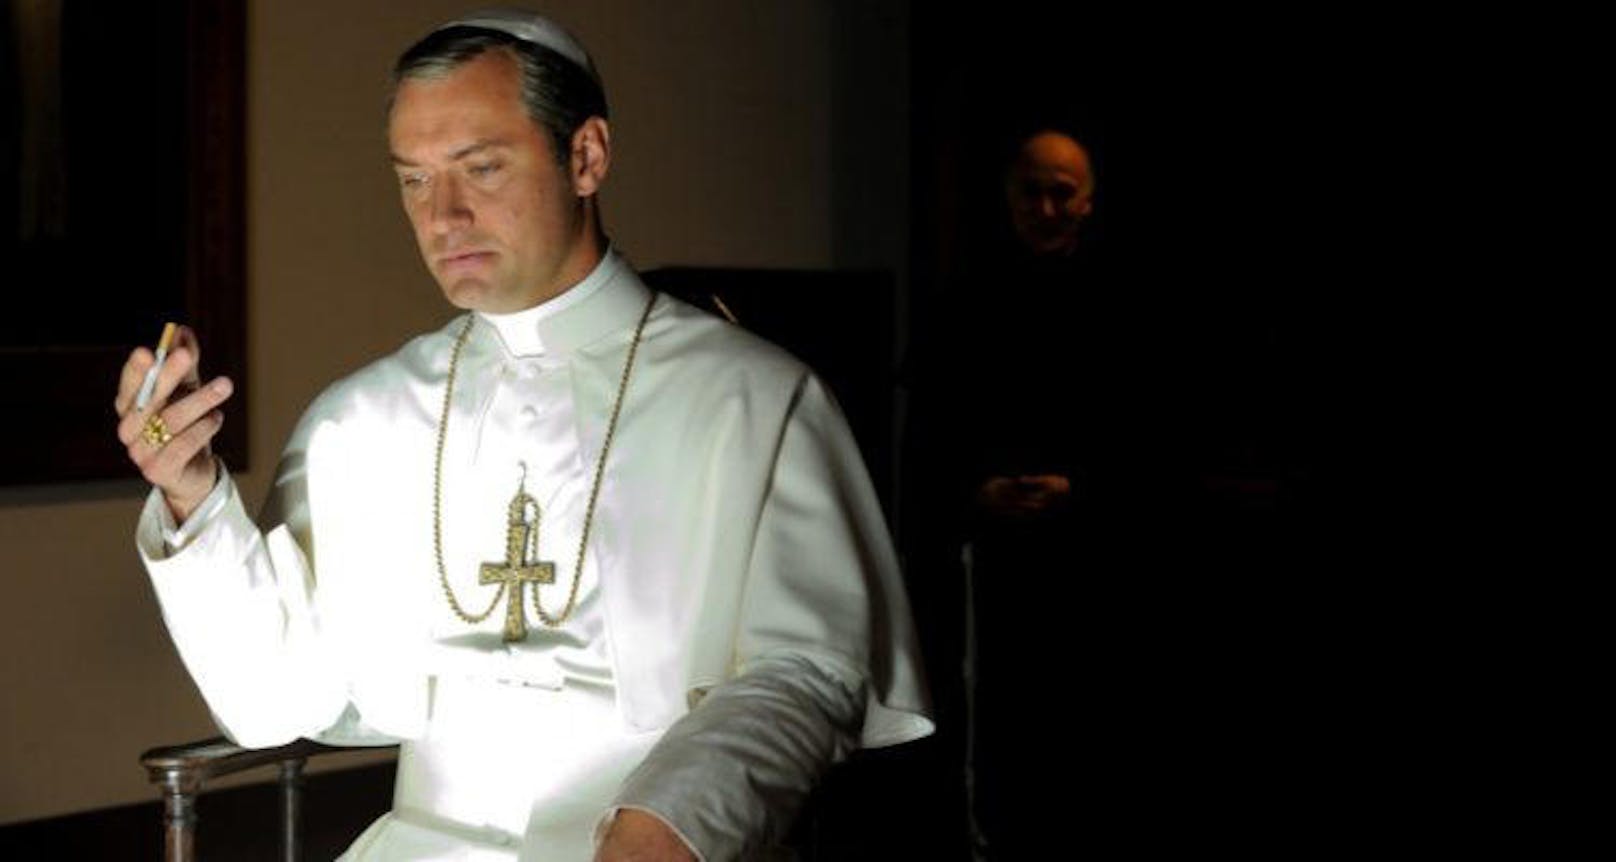 Jude Law als korrupter Papst in "The Young Pope"